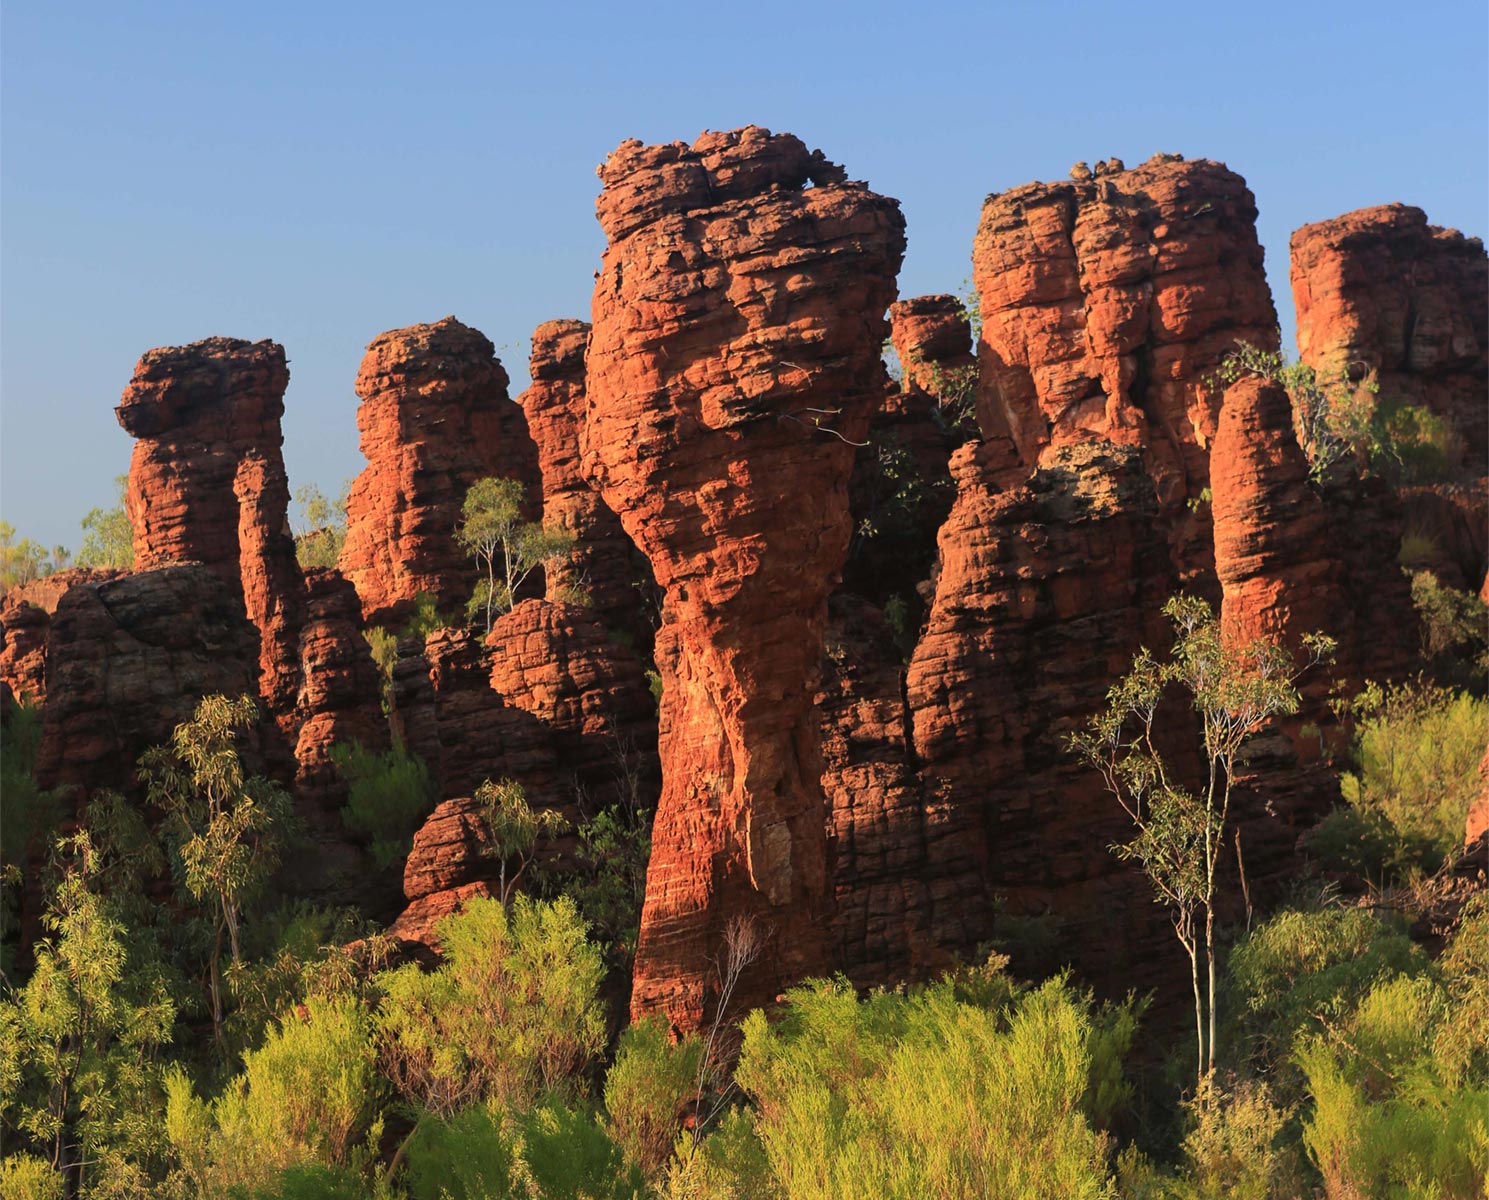 The sandstone formations of the Southern Lost City can be enjoyed via the circuit walk